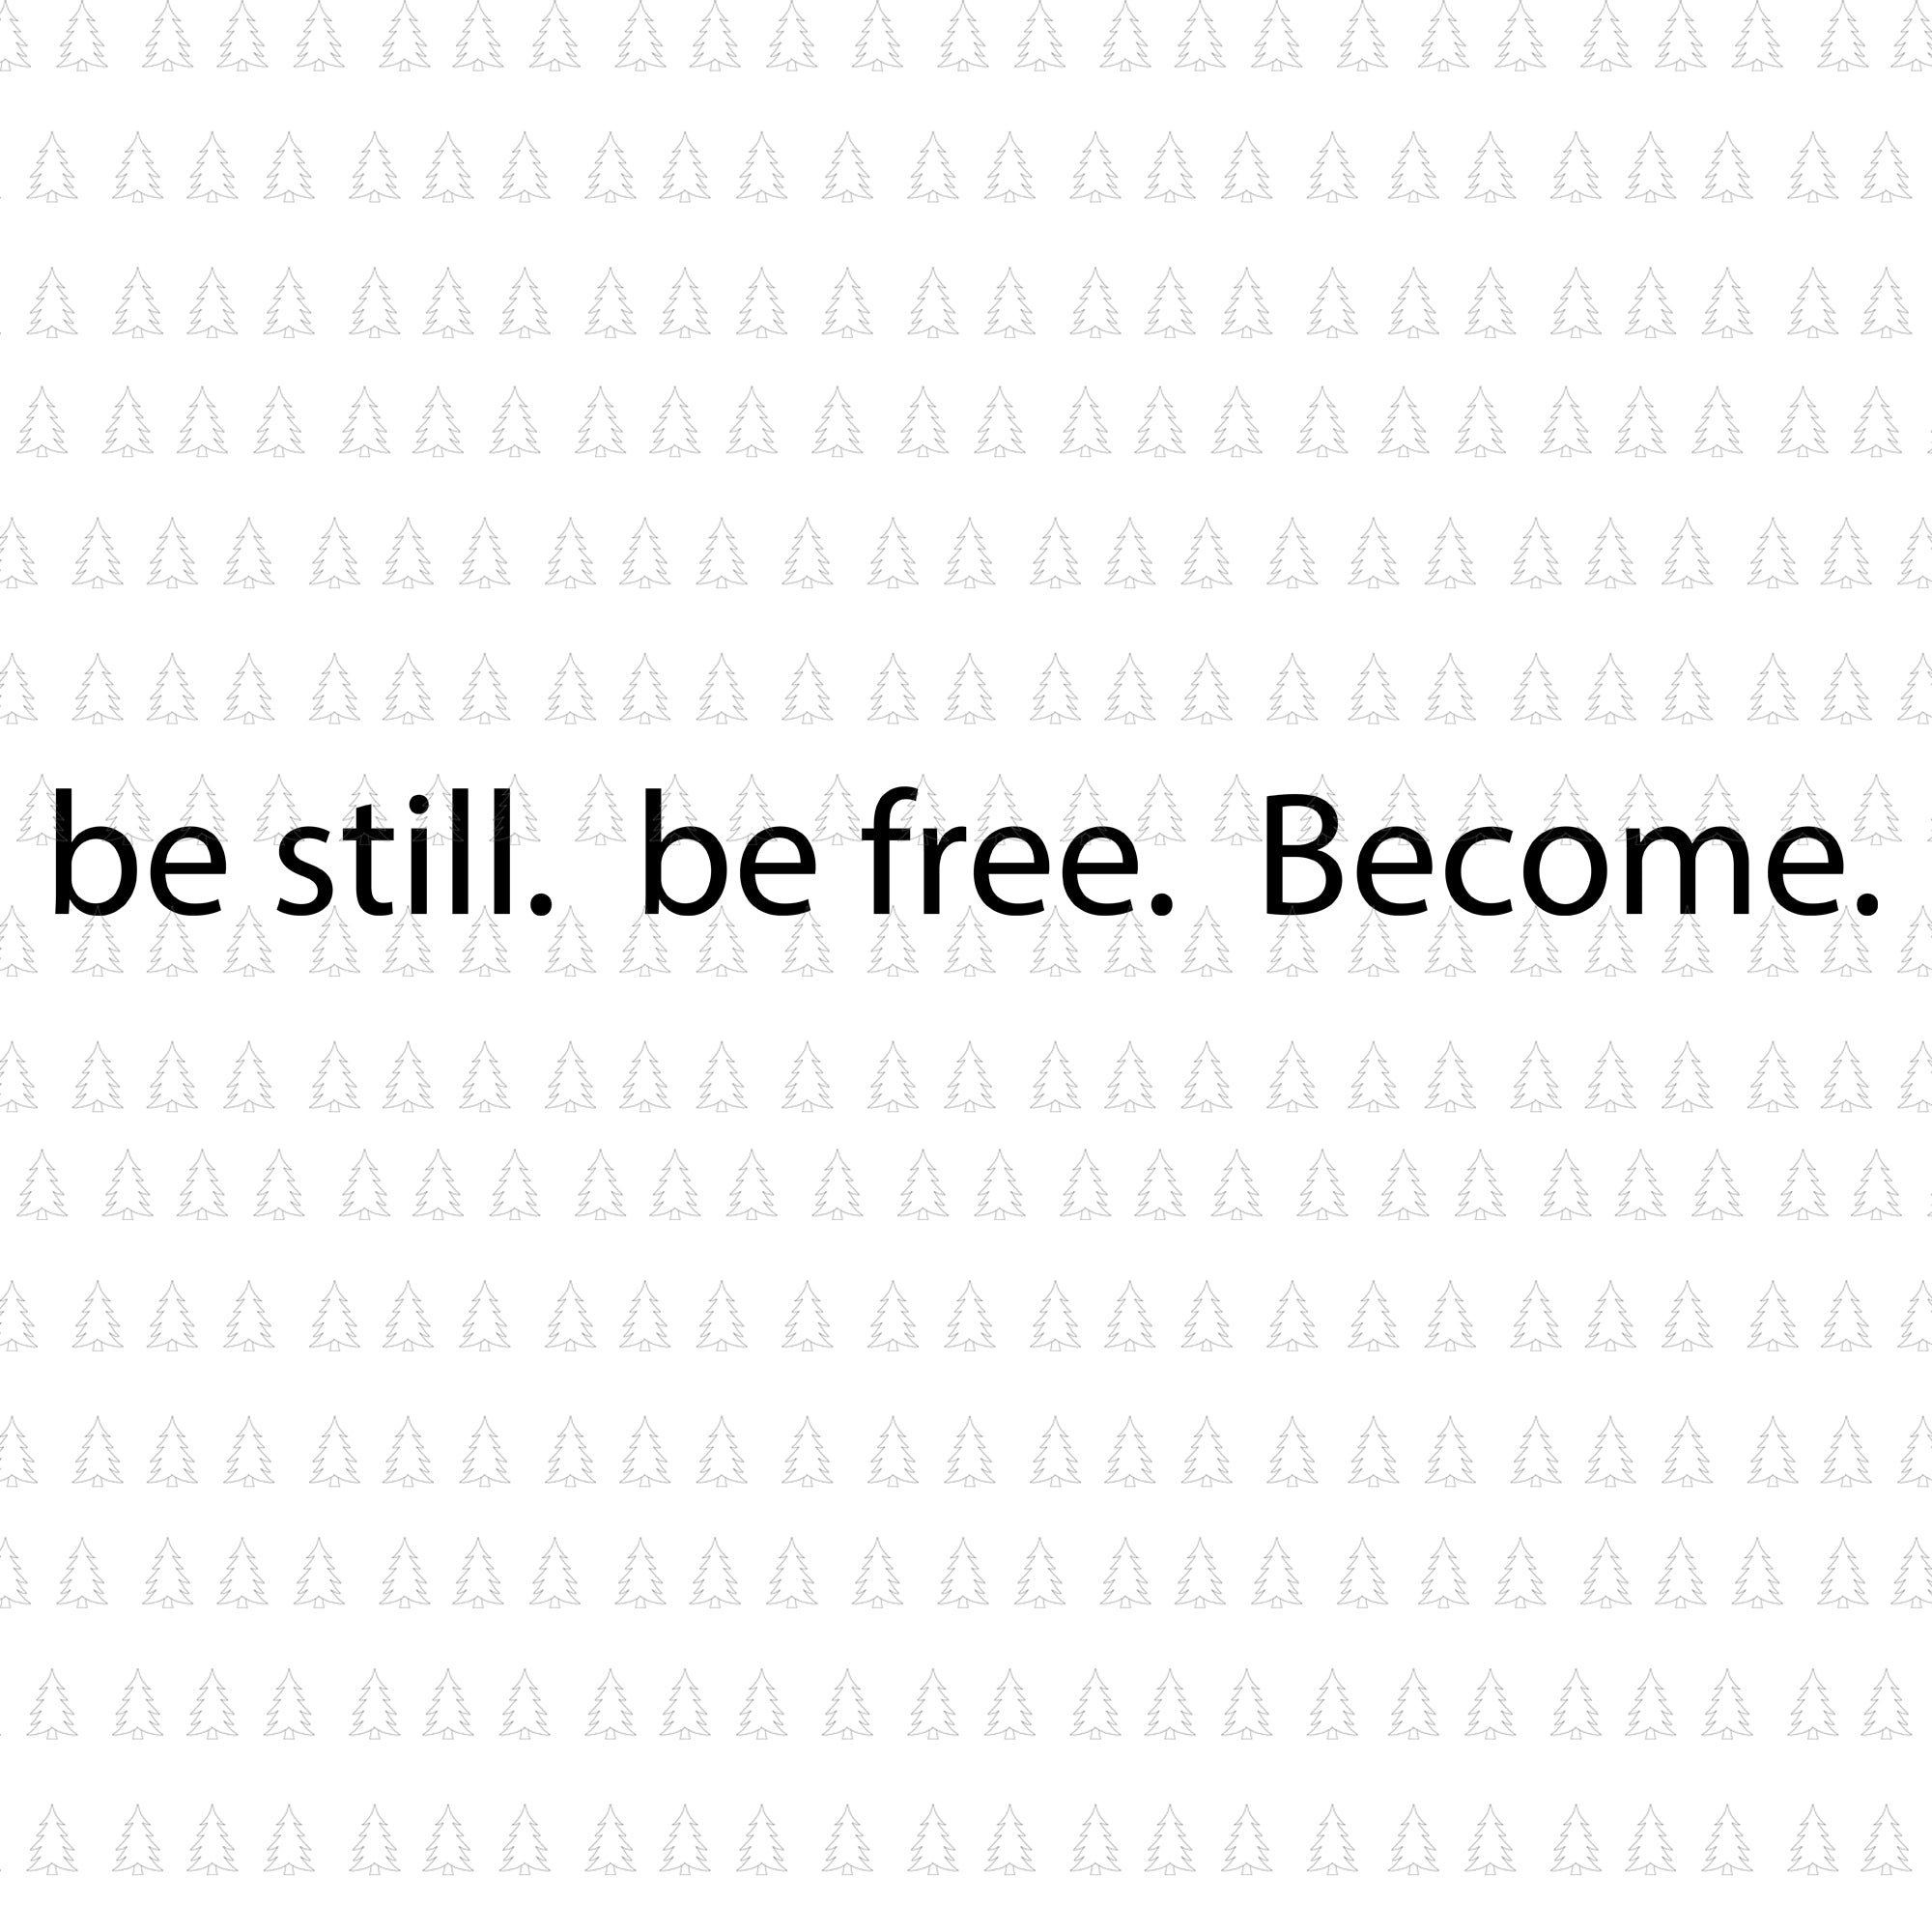 Be still be free become svg, be still be free become png. be still be free become,spiritual statement apparel